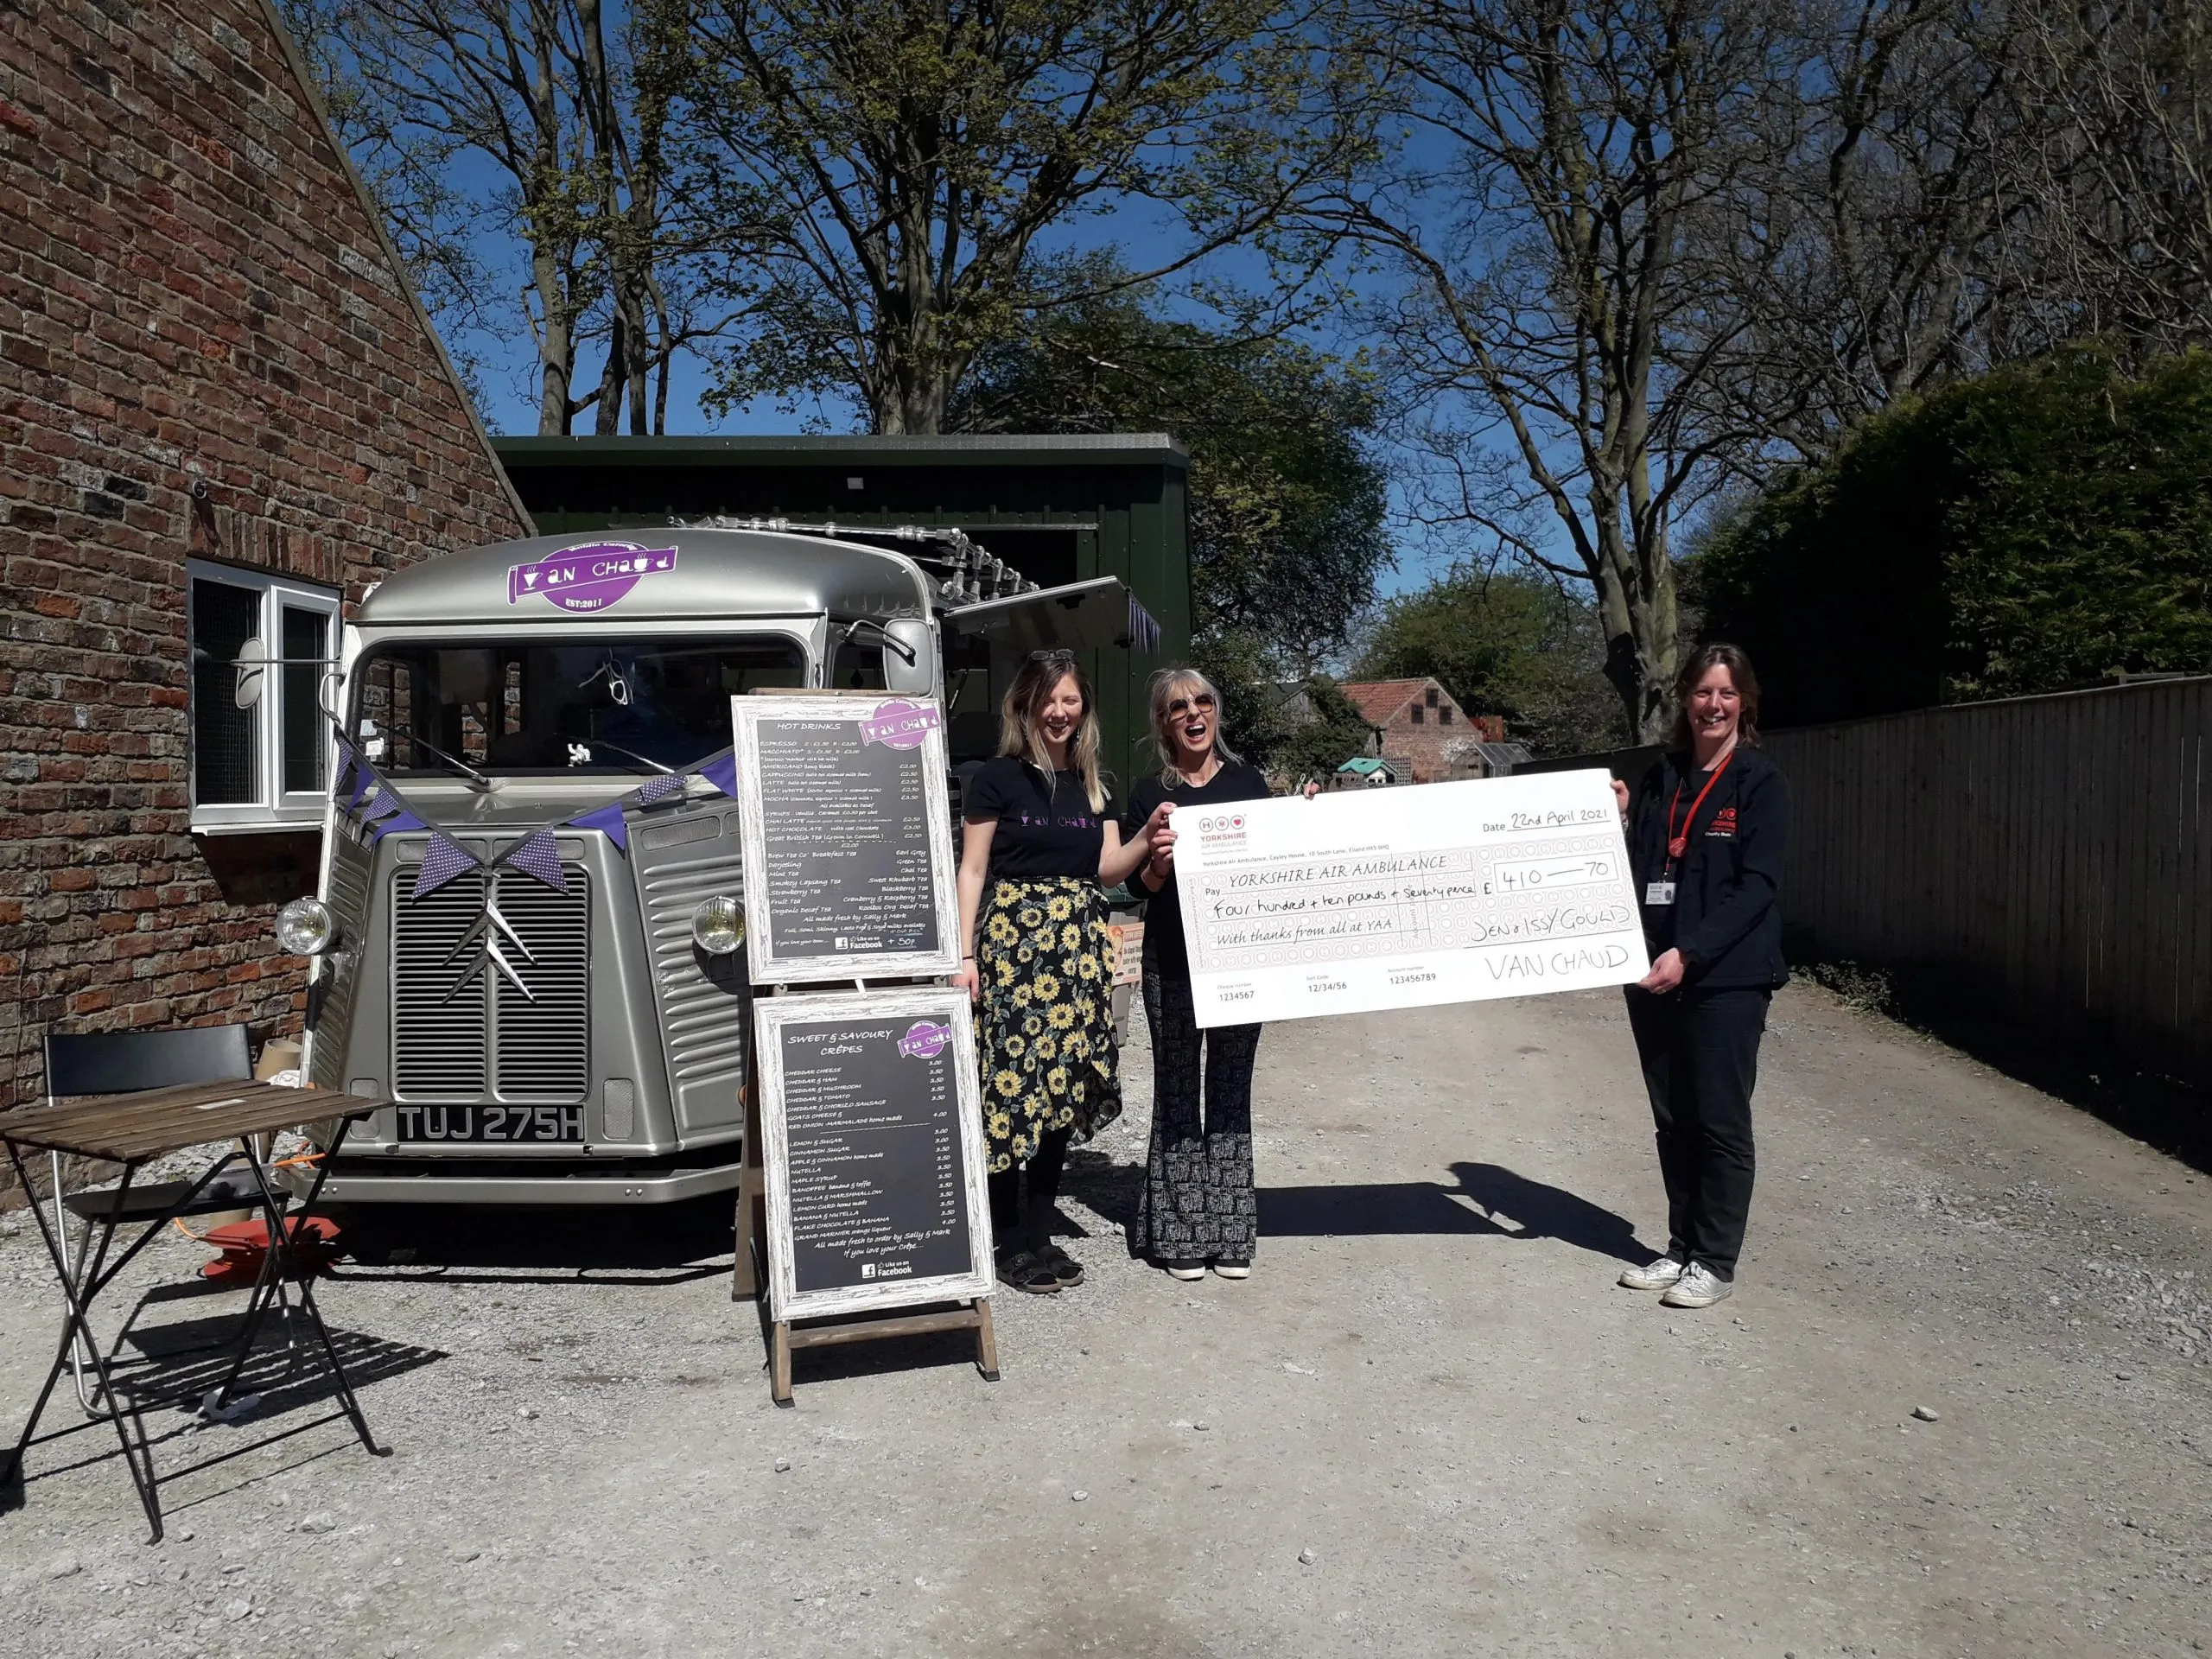 Coffees & Crepes for donations from a van on their drive